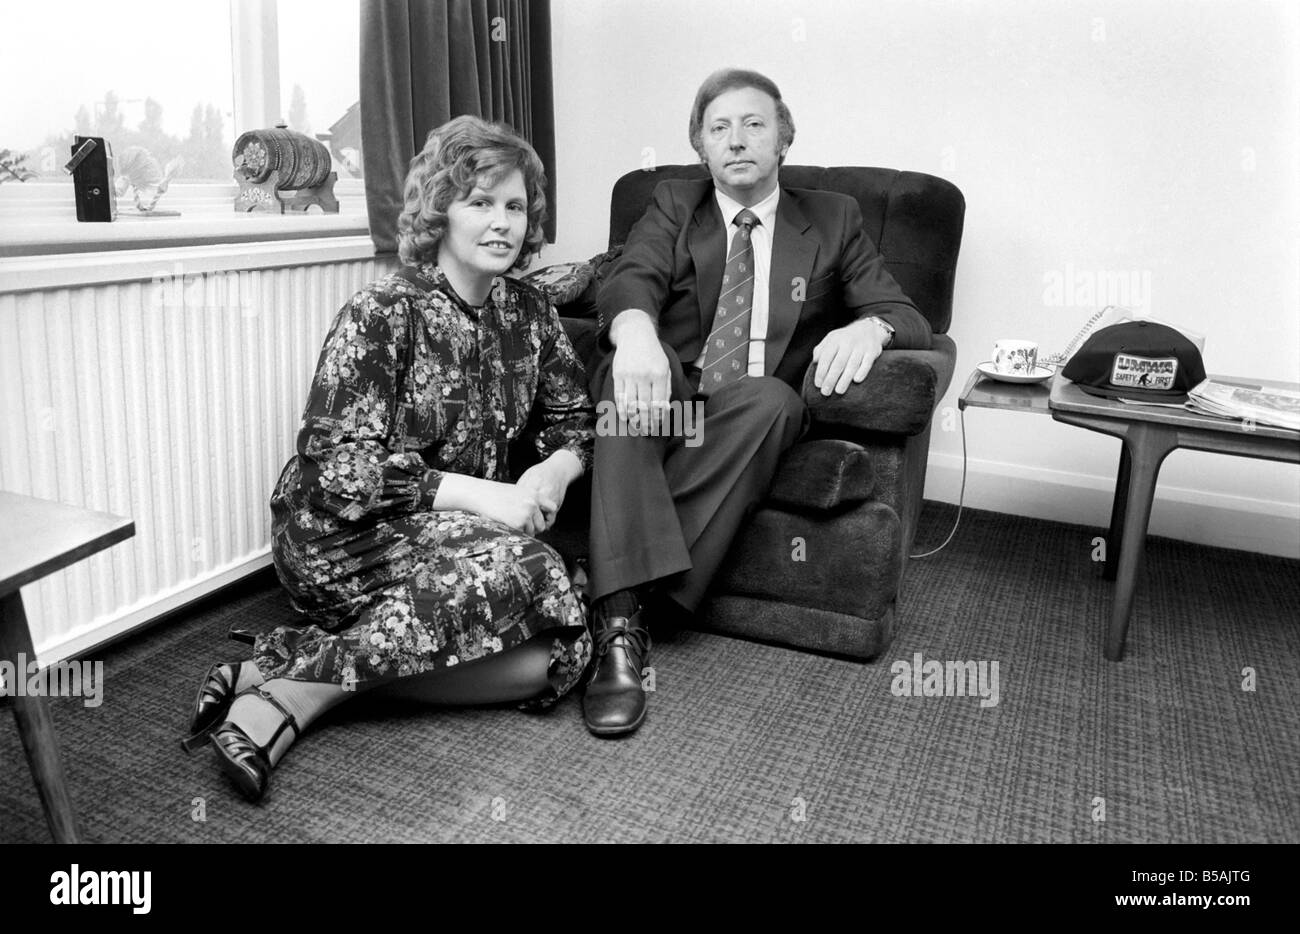 Arthur Scargill: Leader of the National Union of Miners Arthur Scargill at home with his wife. June 1980 80-03110-004 Stock Photo